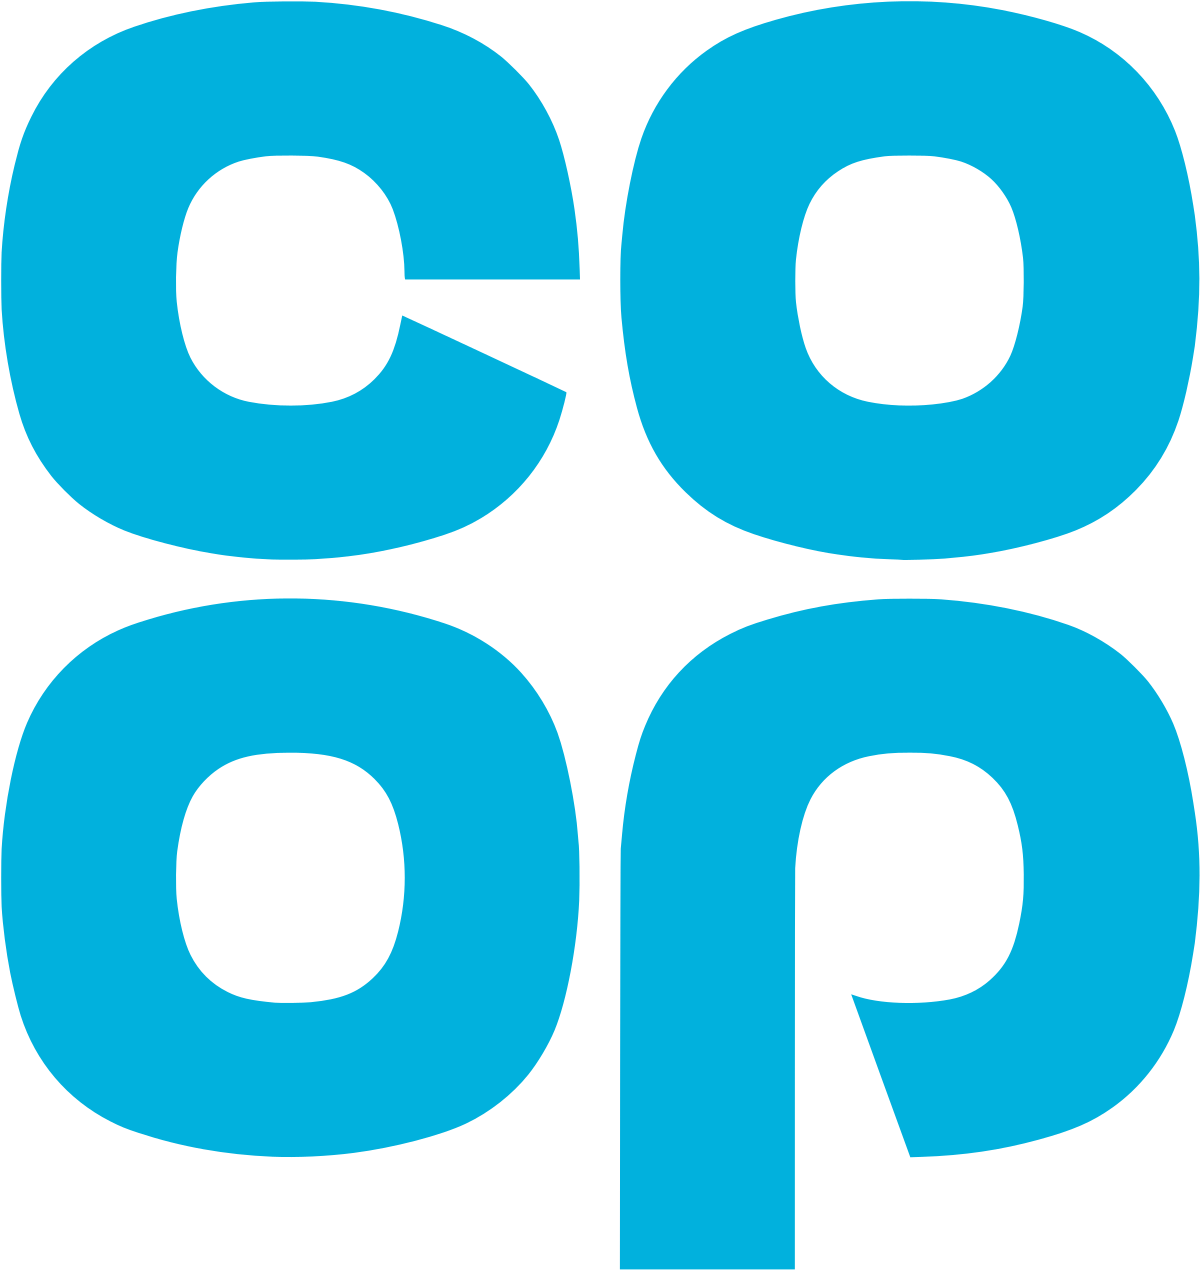 CoOp logo, highlighting our collaboration or service integration with CoOp for improved logistics and supply chain management.